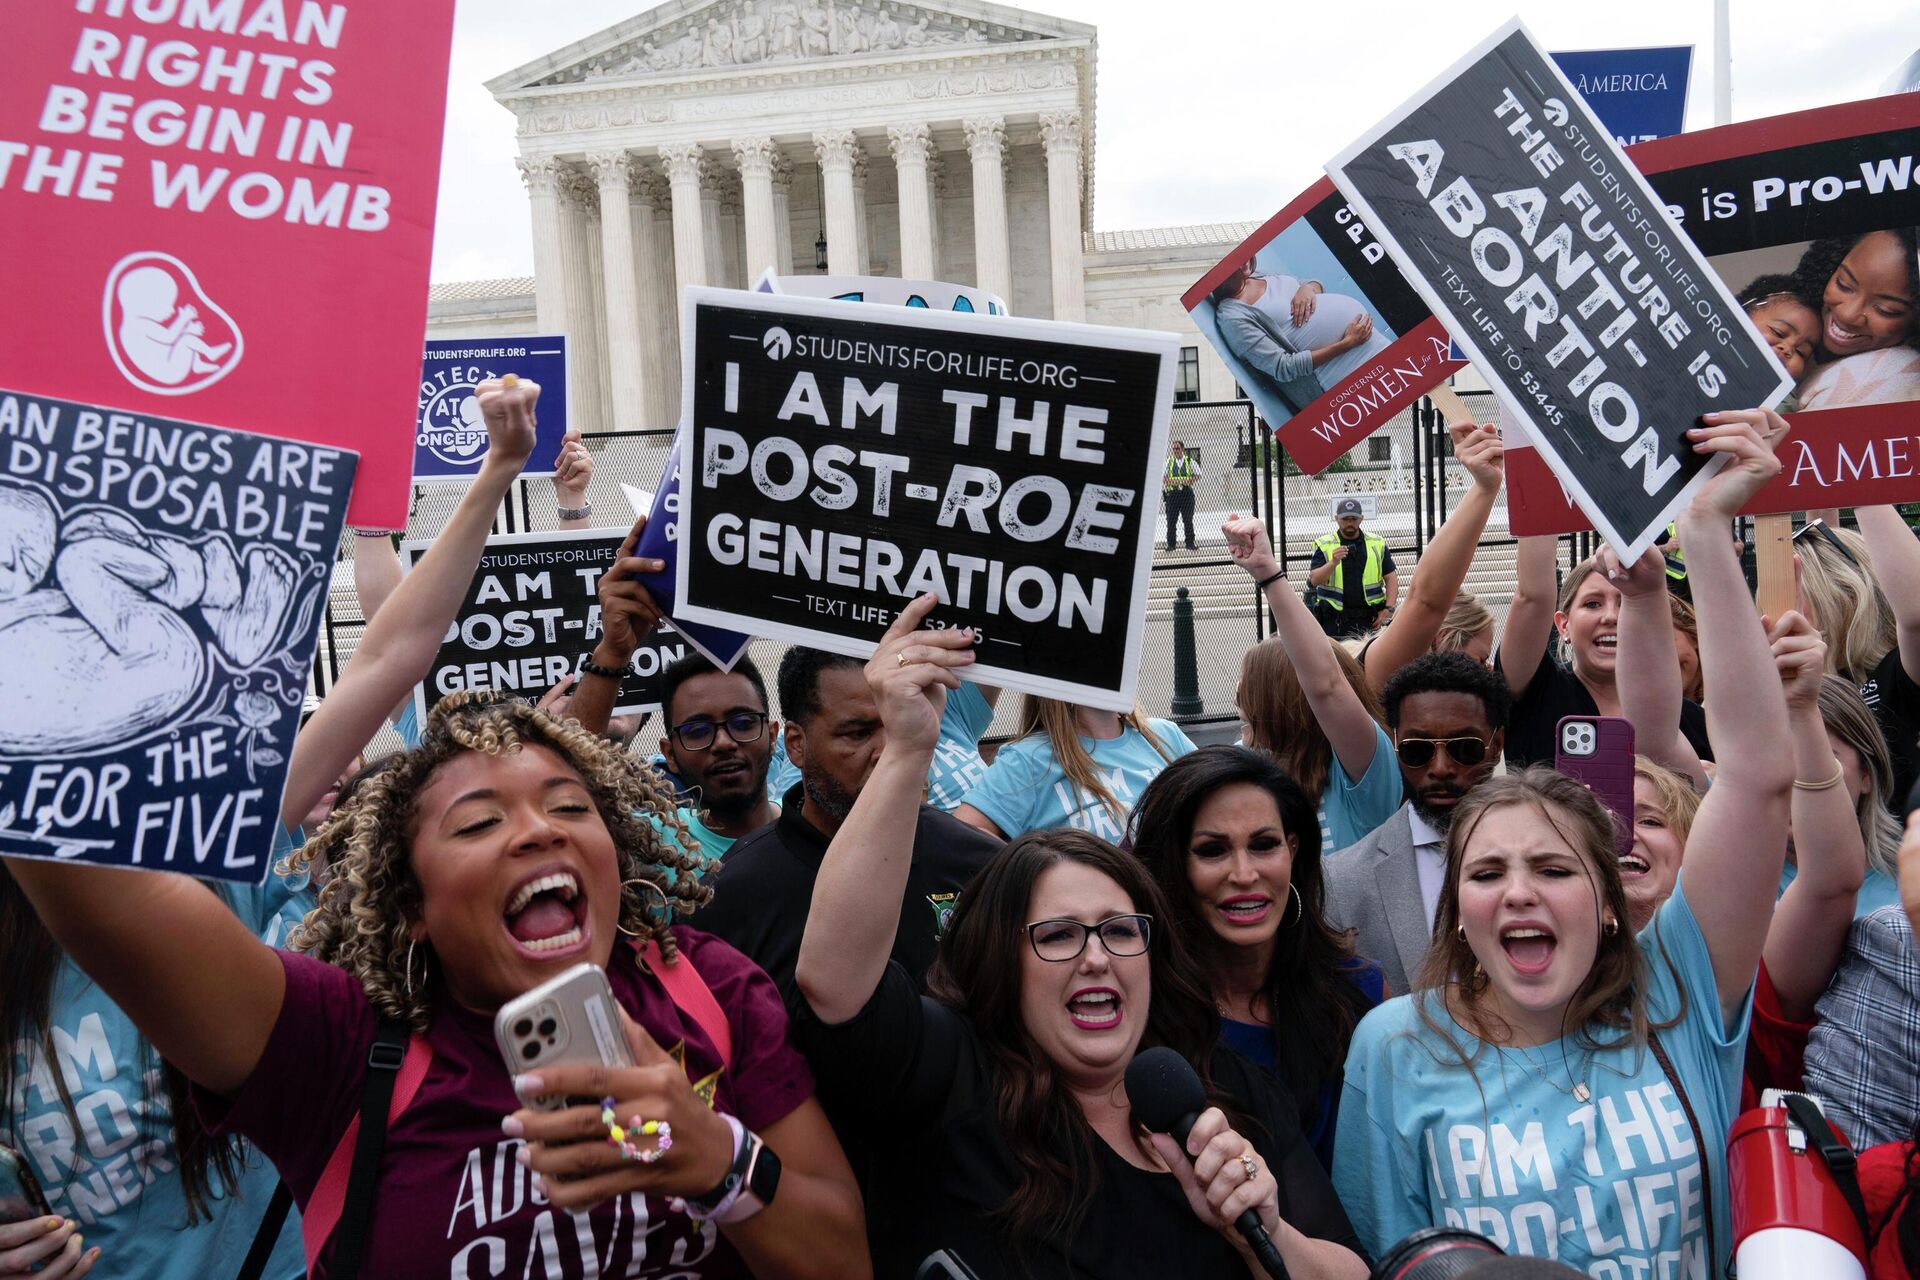 Demonstrators gather outside the Supreme Court in Washington, Friday, June 24, 2022. The Supreme Court has ended constitutional protections for abortion that had been in place nearly 50 years, a decision by its conservative majority to overturn the court's landmark abortion cases. (AP Photo/Jose Luis Magana) - Sputnik International, 1920, 25.07.2022